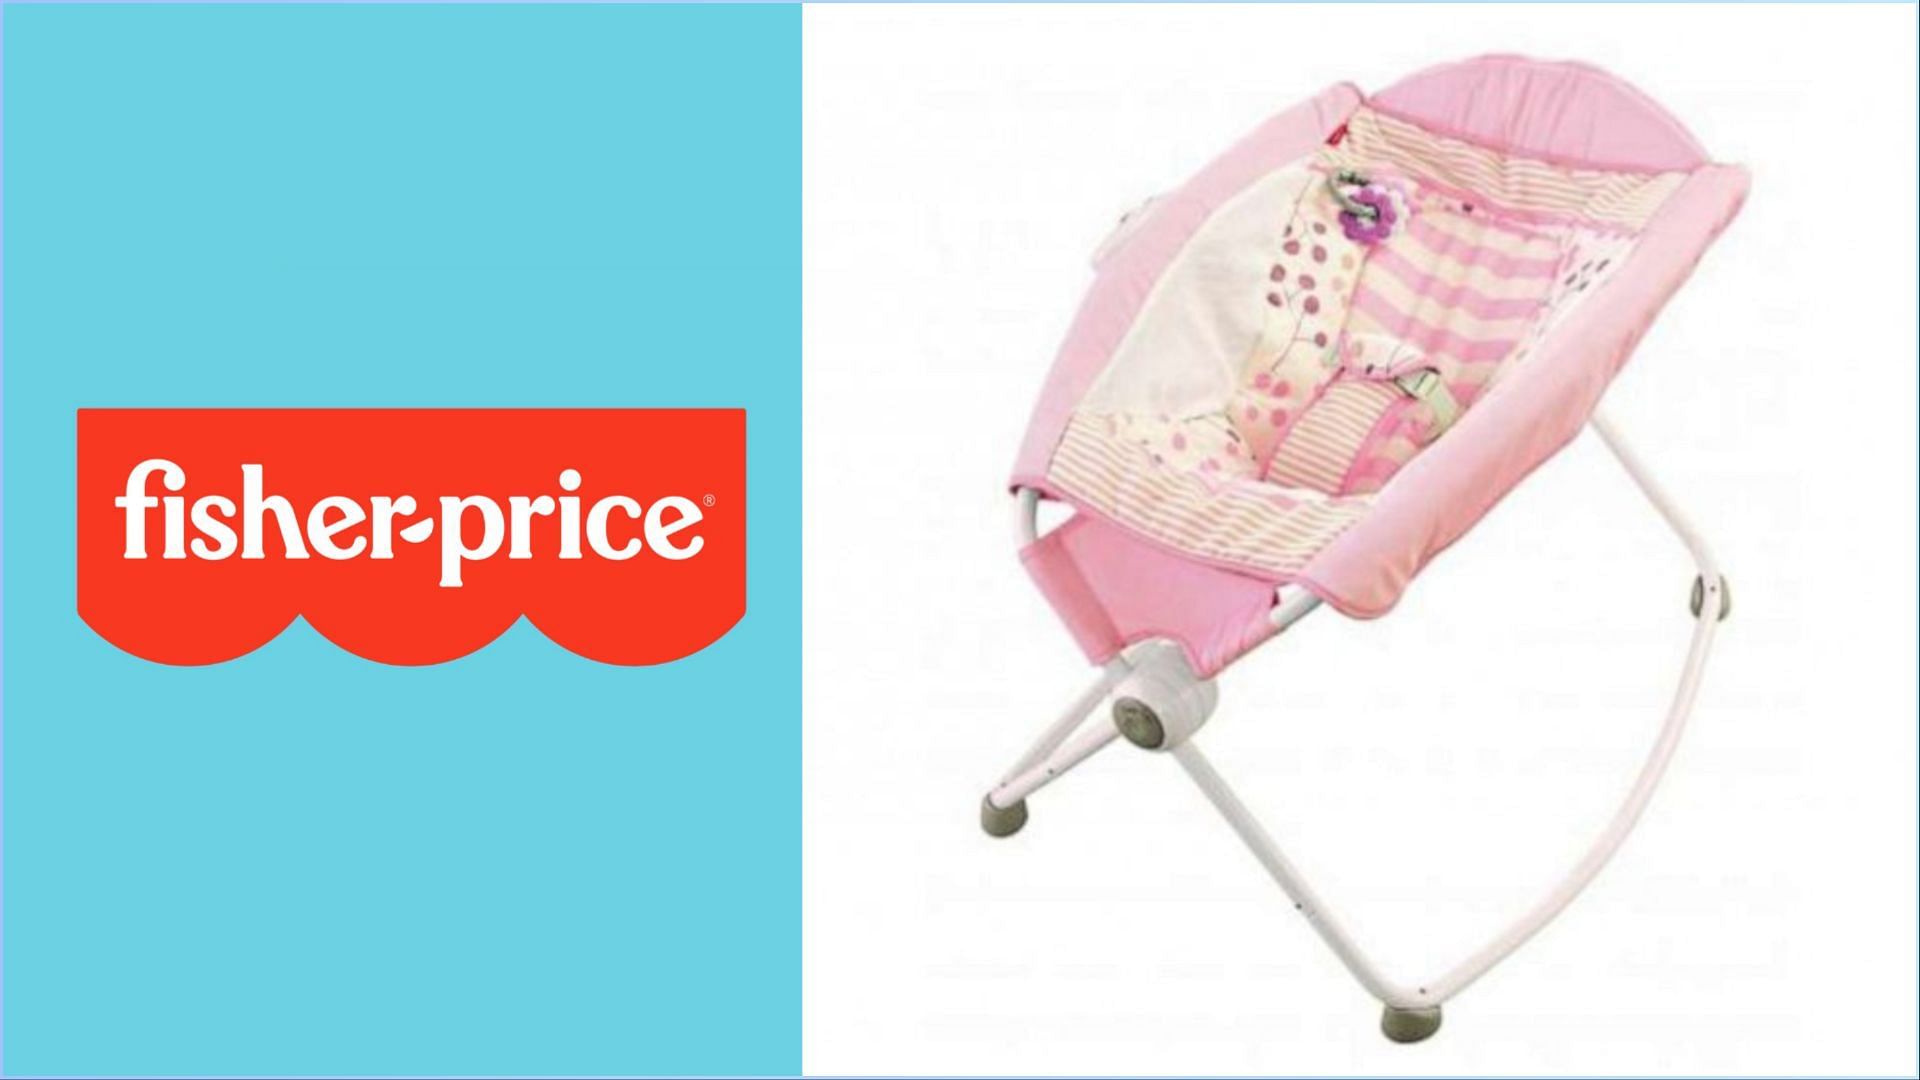 the recalled Fisher Price Rock n Play sleeper which are linked to the death of more than 100 infants (Image via CPSC)